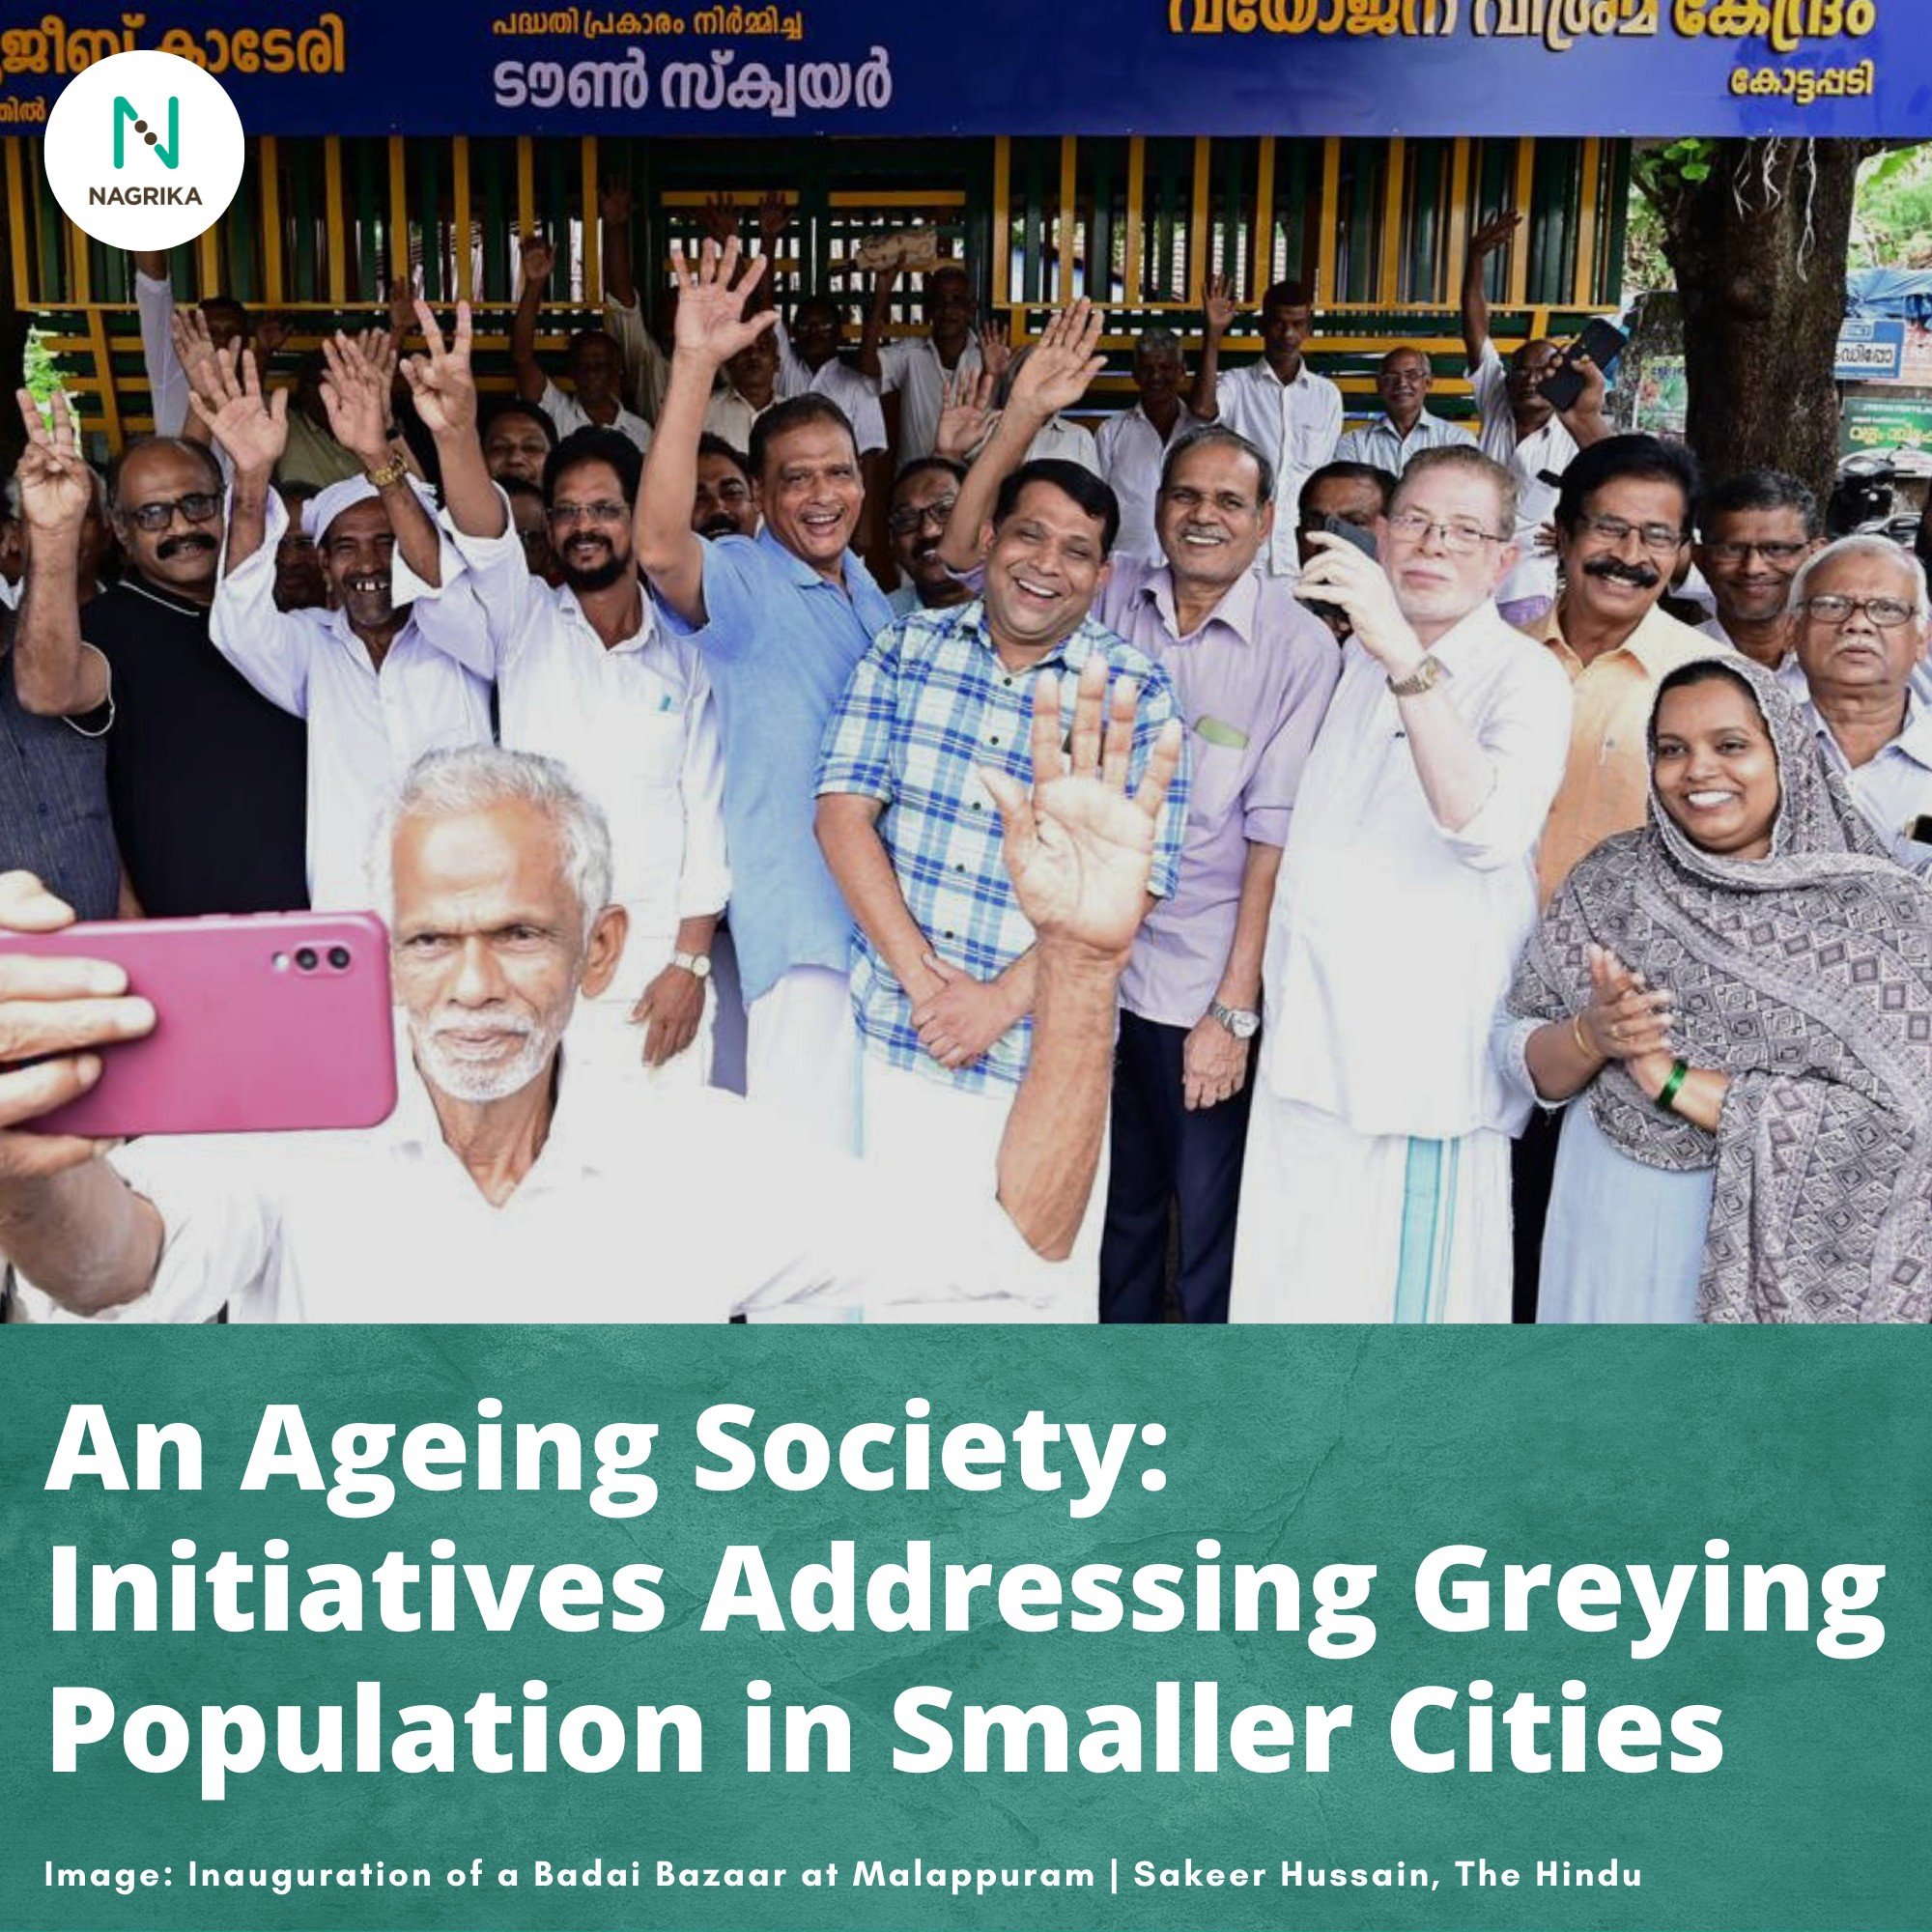 Did you know that India&rsquo;s share of #SeniorCitizens is projected to double by 2050? India Ageing Report 2023 reports that 1 out of 5 people will become a senior citizen by the next 2 decades. Improved healthcare facilities &amp; tech advancement